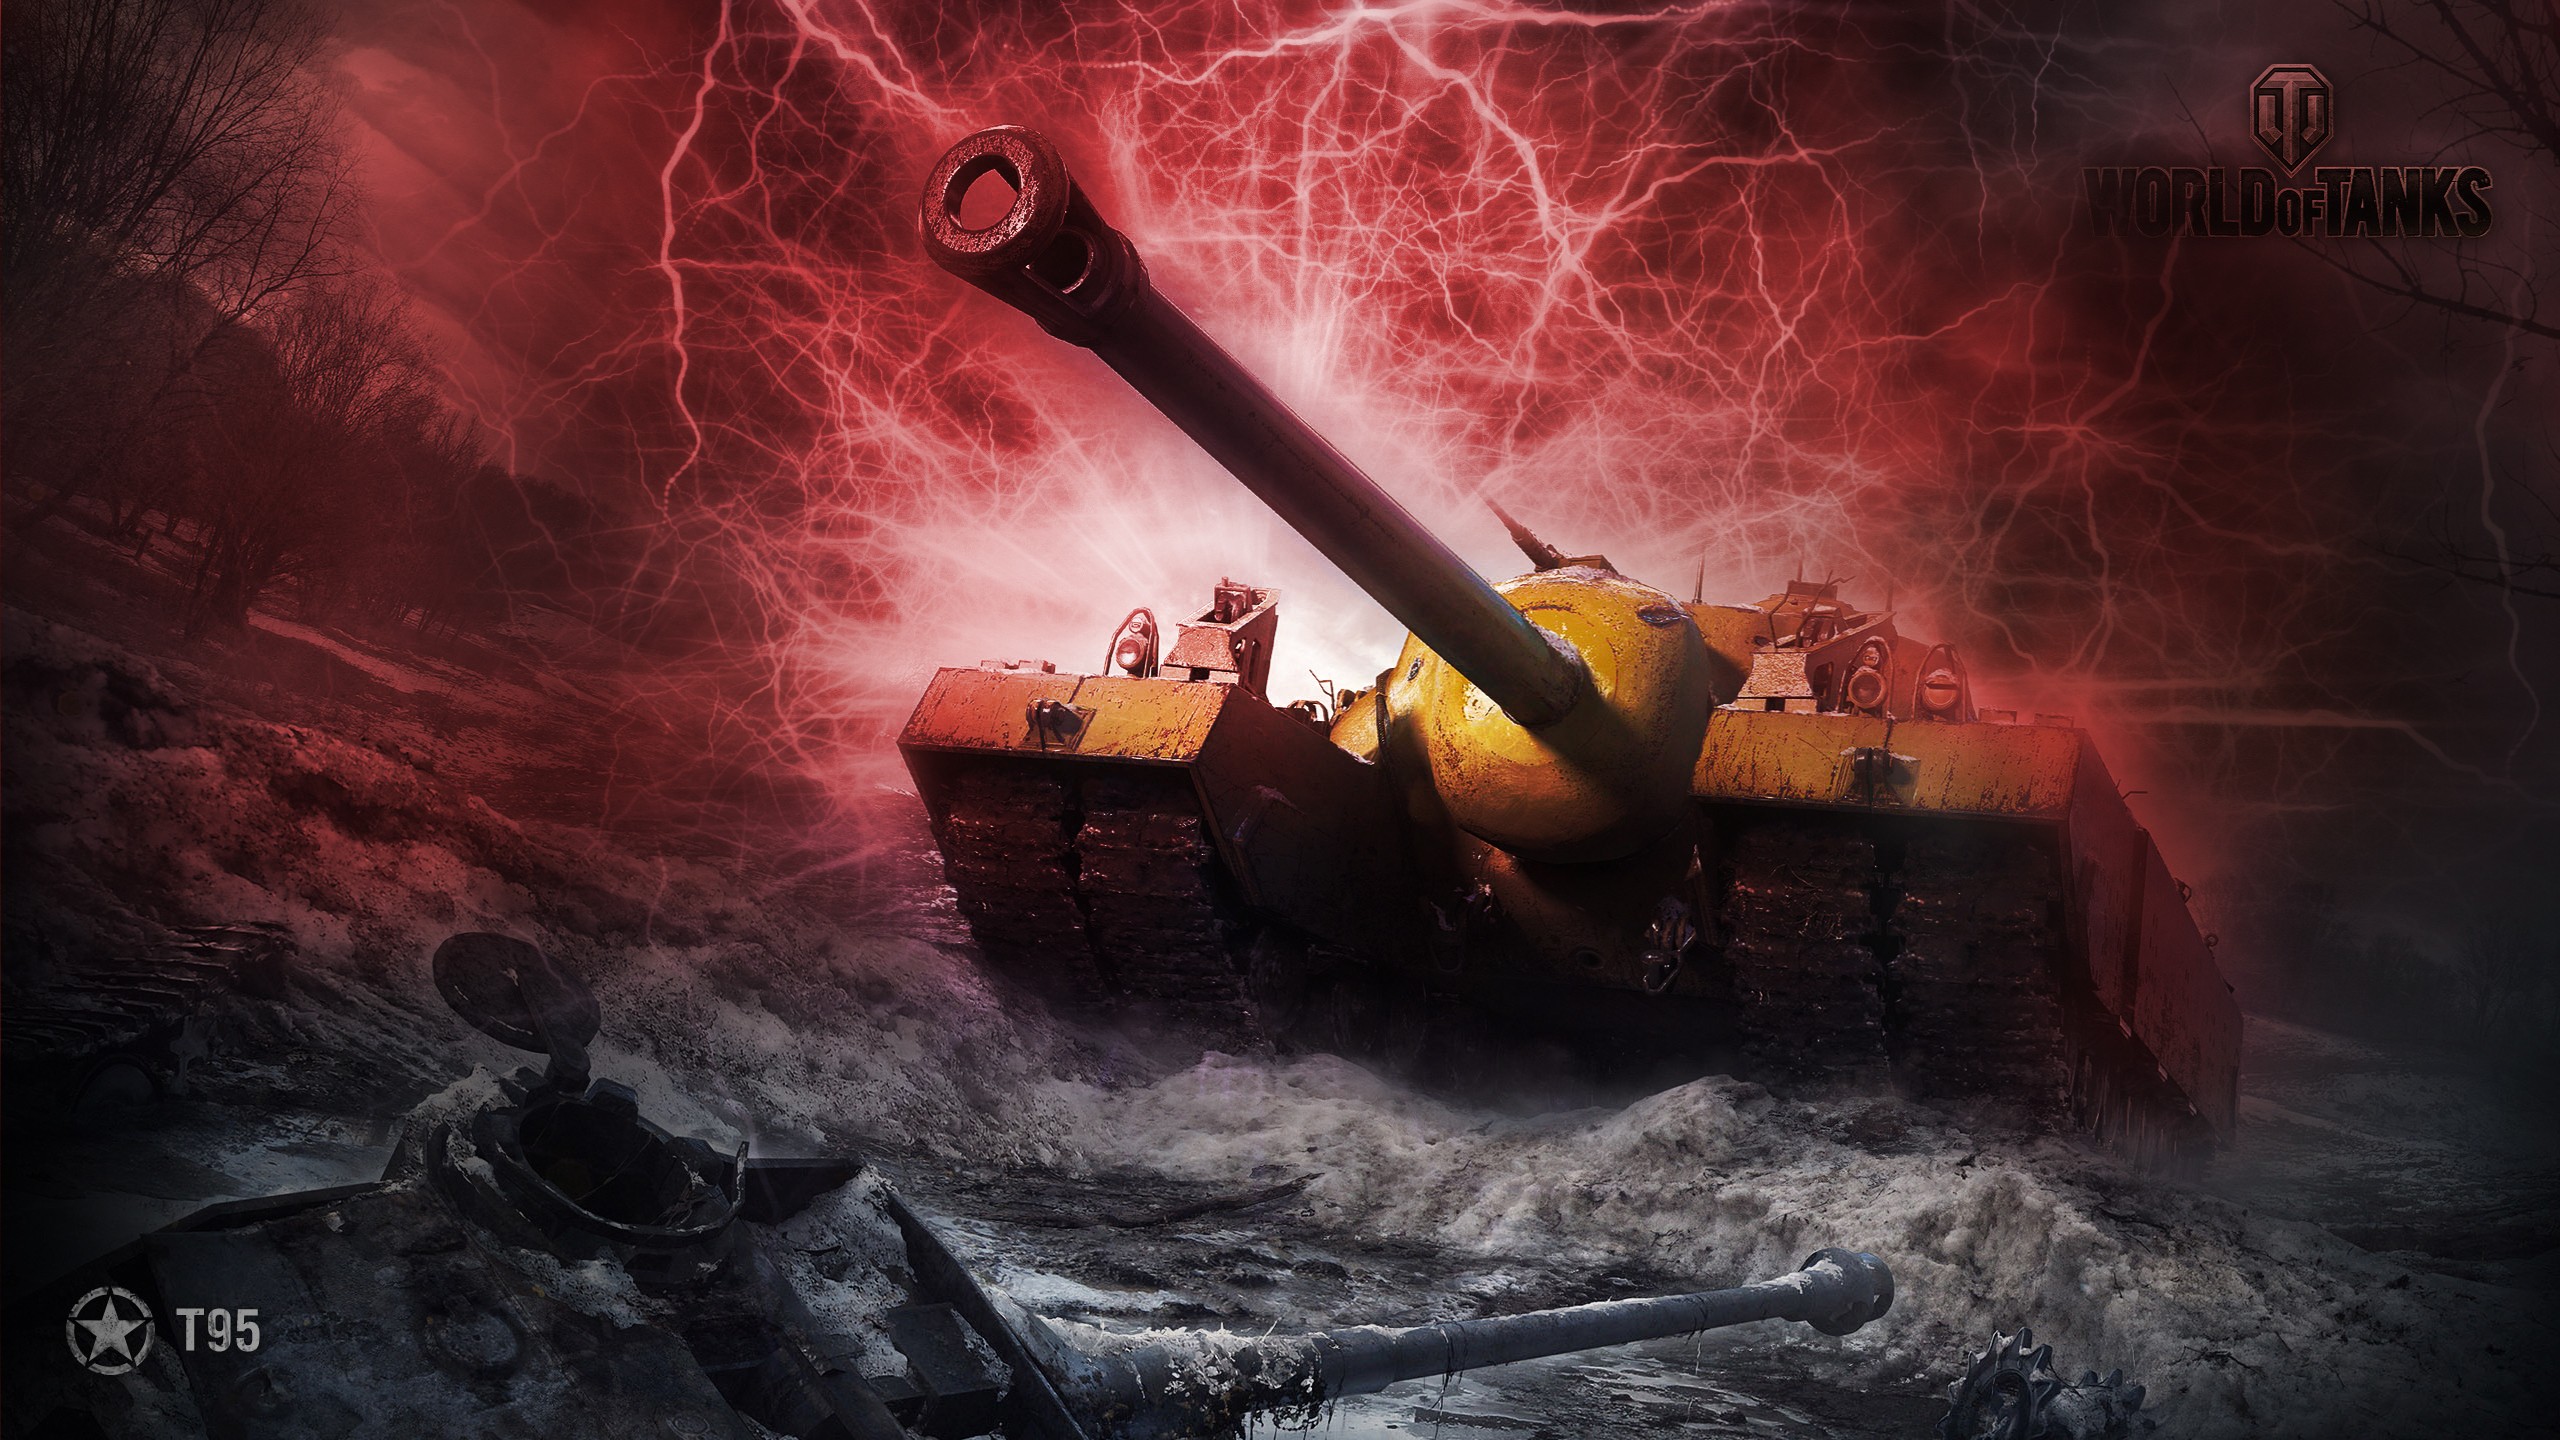 Red Electric Tank Explosion Abstract T95 Wallpaper HD